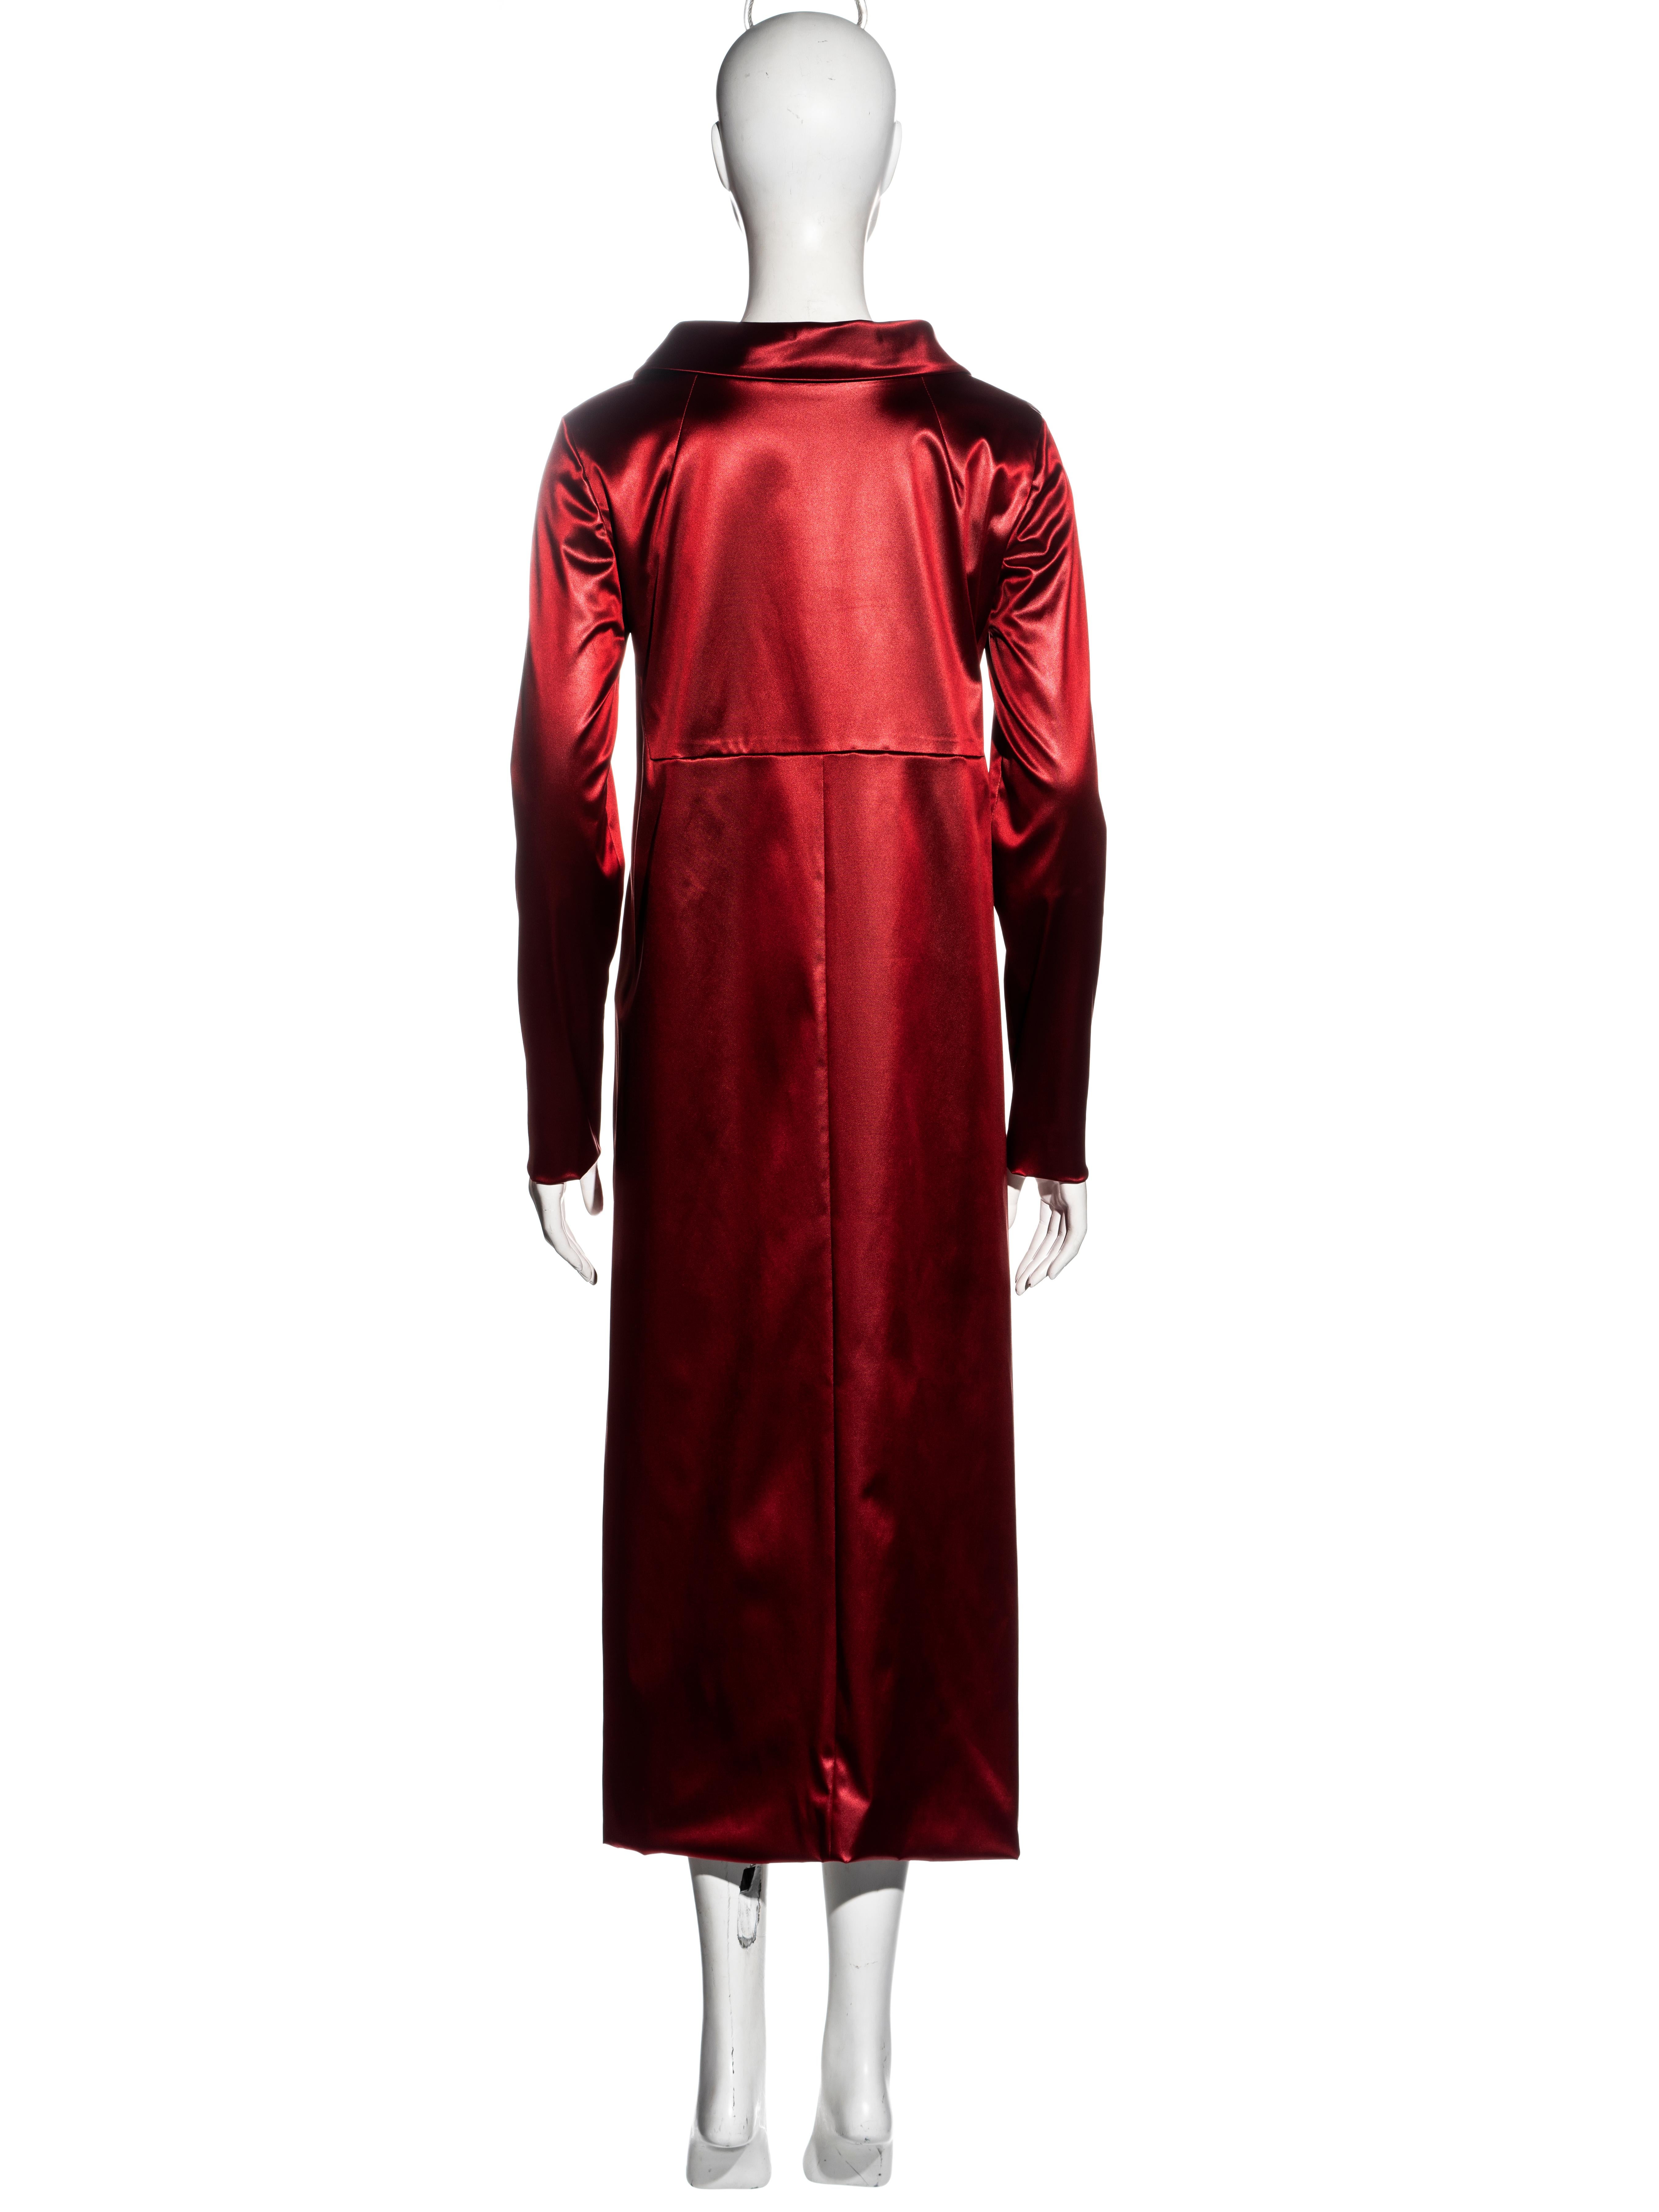 Dolce & Gabbana red stretch-satin coat and skirt set, ss 1999 For Sale 3